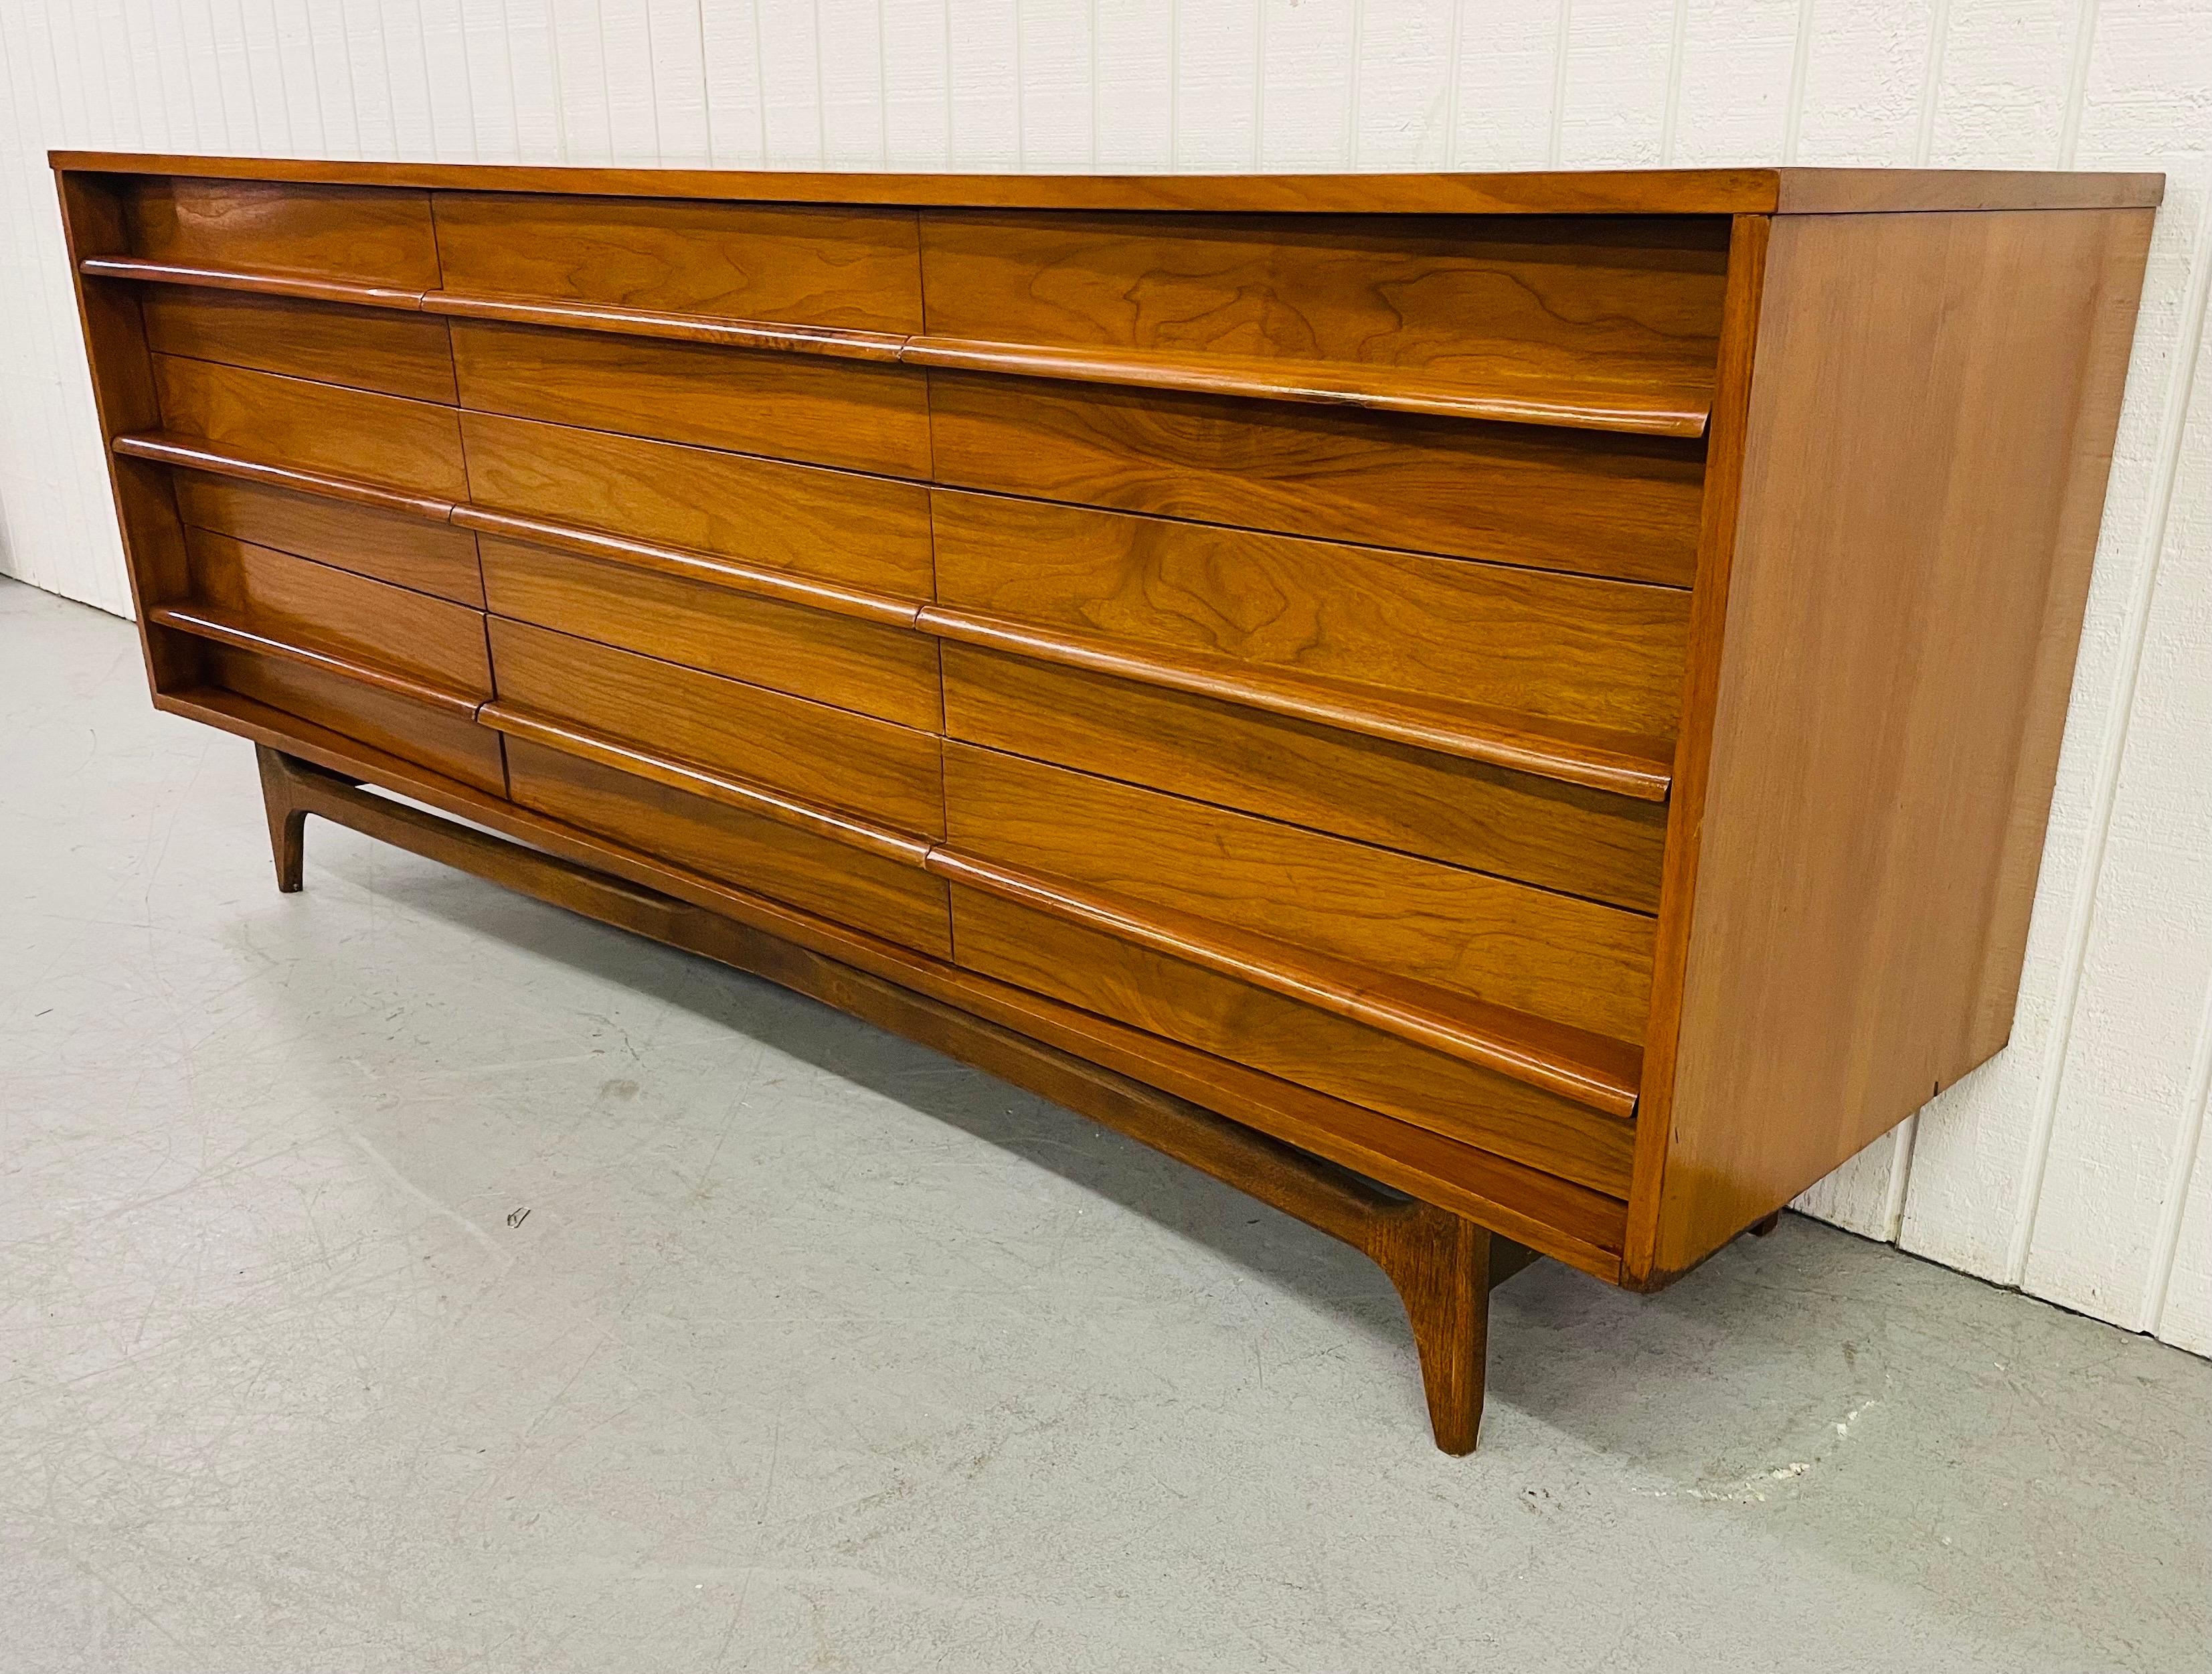 This listing is for a mid-century Young MFG walnut dresser. Featuring a curved front design, nine drawers for storage, and a beautiful walnut finish. An extraordinary design to complete your bedroom or living room as a sideboard.